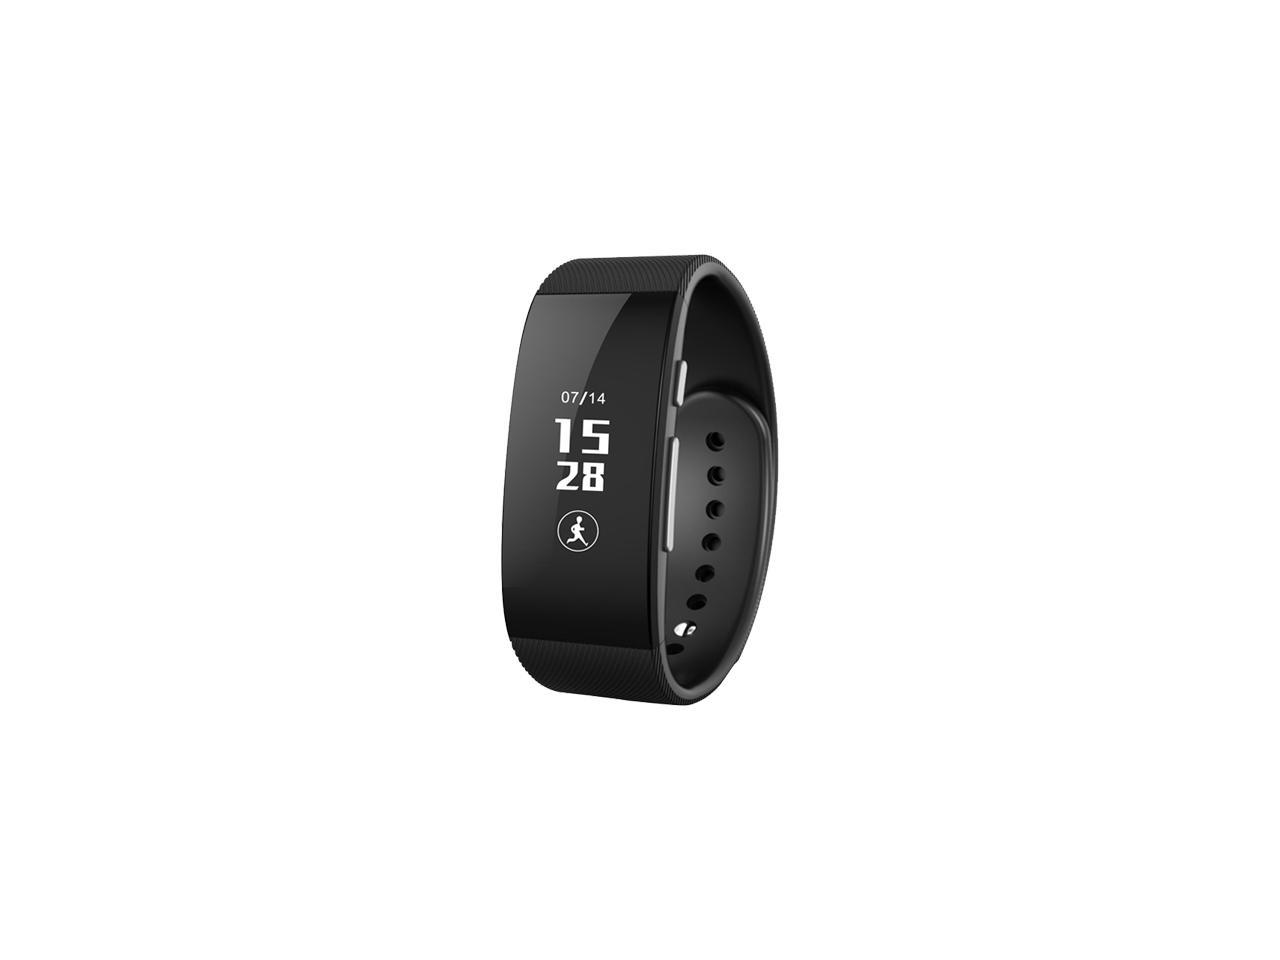 U3 Smart Bracelet Bluetooth Waterproof Touch Screen Fitness Tracker Health Wristband Sleep Monitor Smart band for Phones - Android/IOS